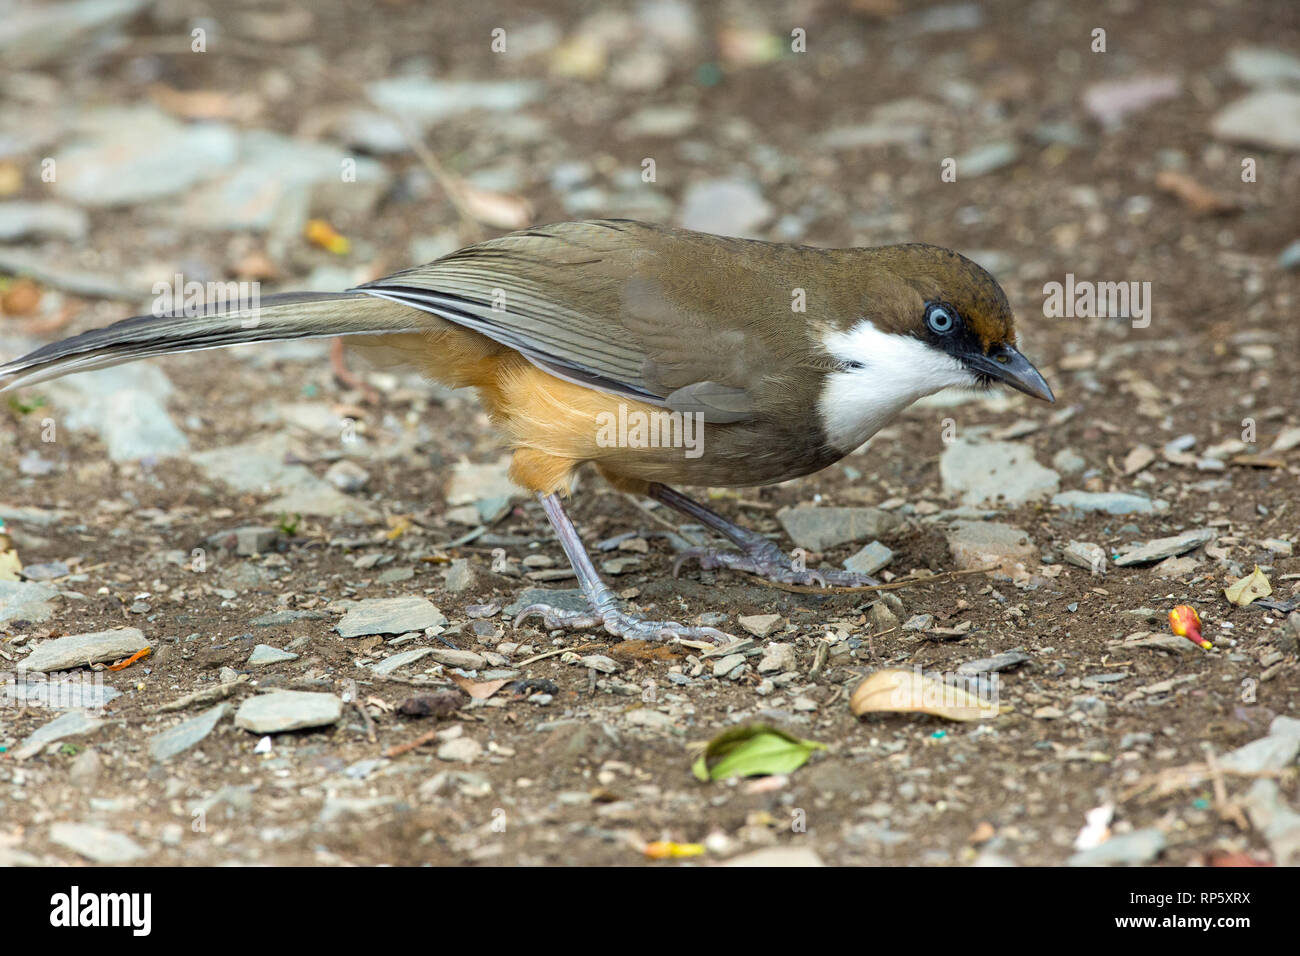 White-throated Laughingthrush Garrulax albogularis). Side view of a bird on the ground, showing plumage colour and markings. Himalayan foothills northern India. Stock Photo